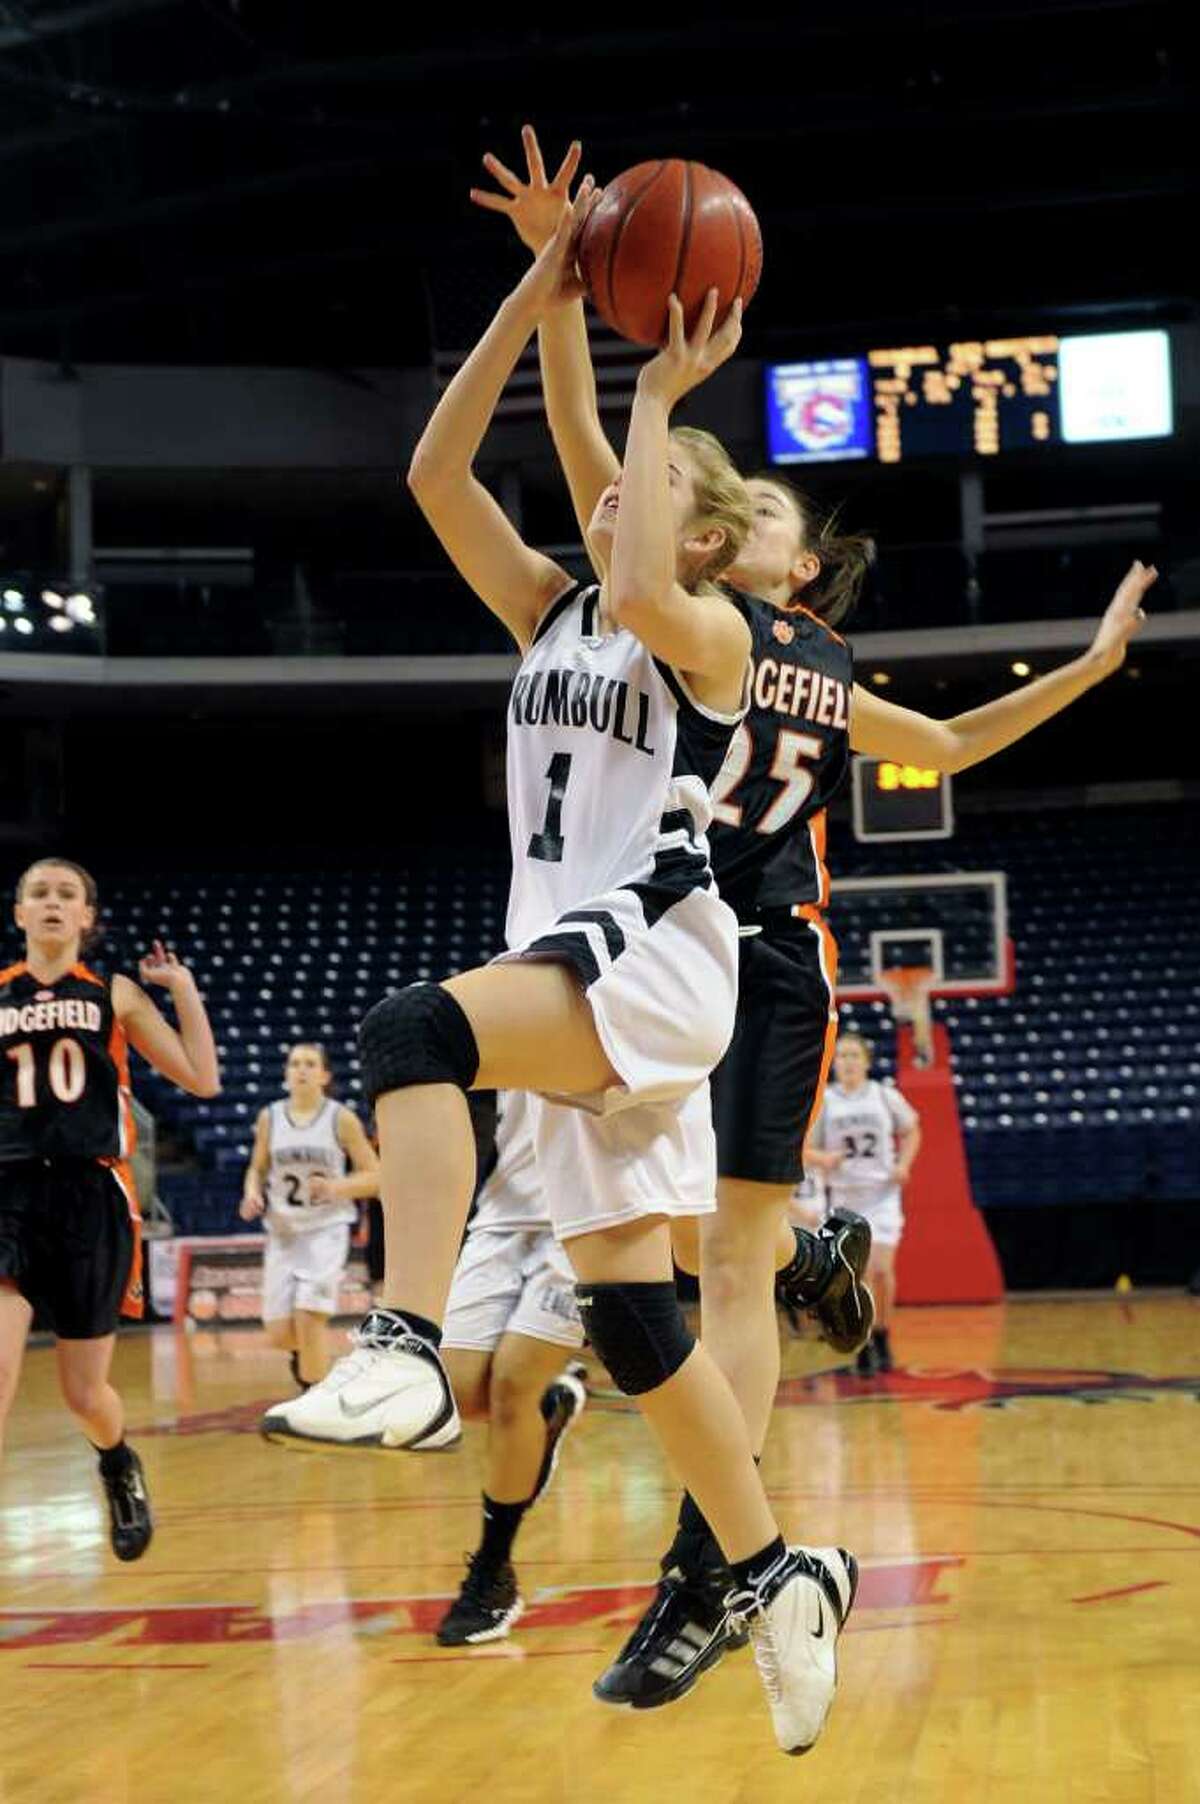 Trumbull's Alexa Pfohl puts up a shot as Ridgefield's Molly Welch defends during Thursday's FCIAC girls basketball championship game at Webster Bank Arena at Harbor Yard on February 24, 2011. Pfohl was named Most Valuable Player after the game.